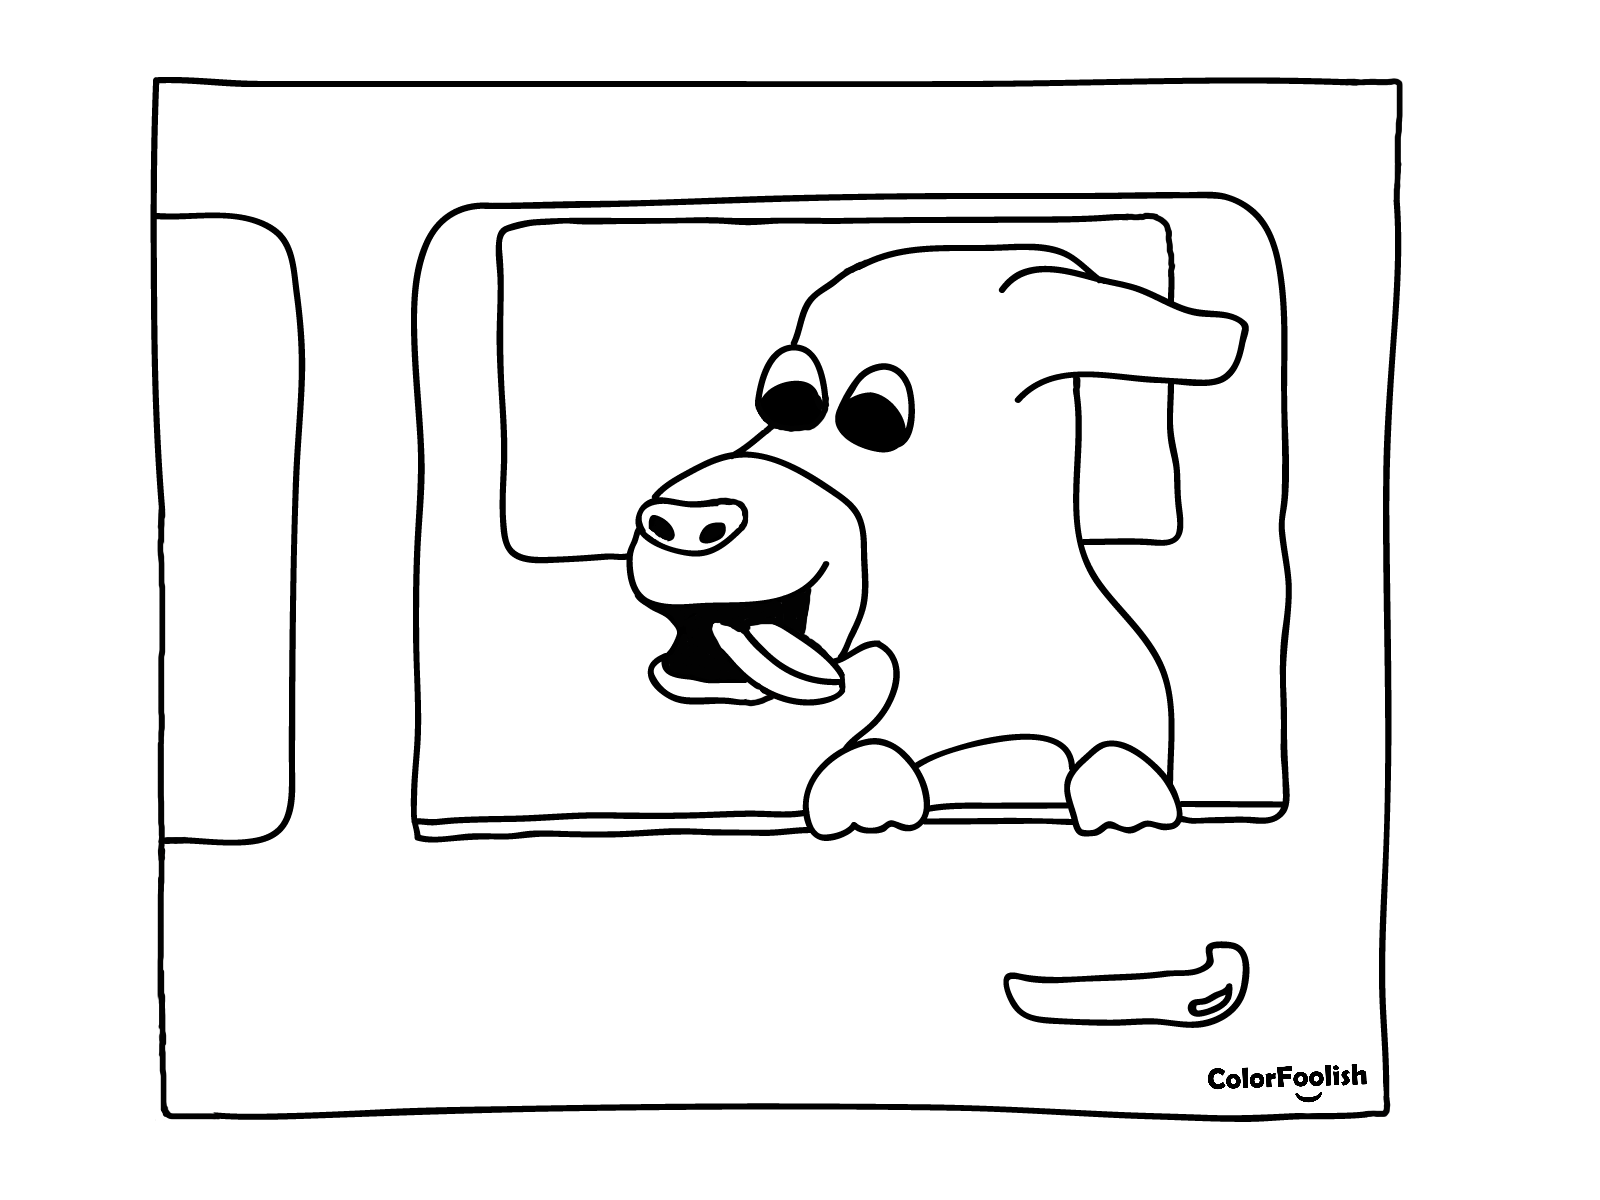 Coloring page of dog with head outside the window